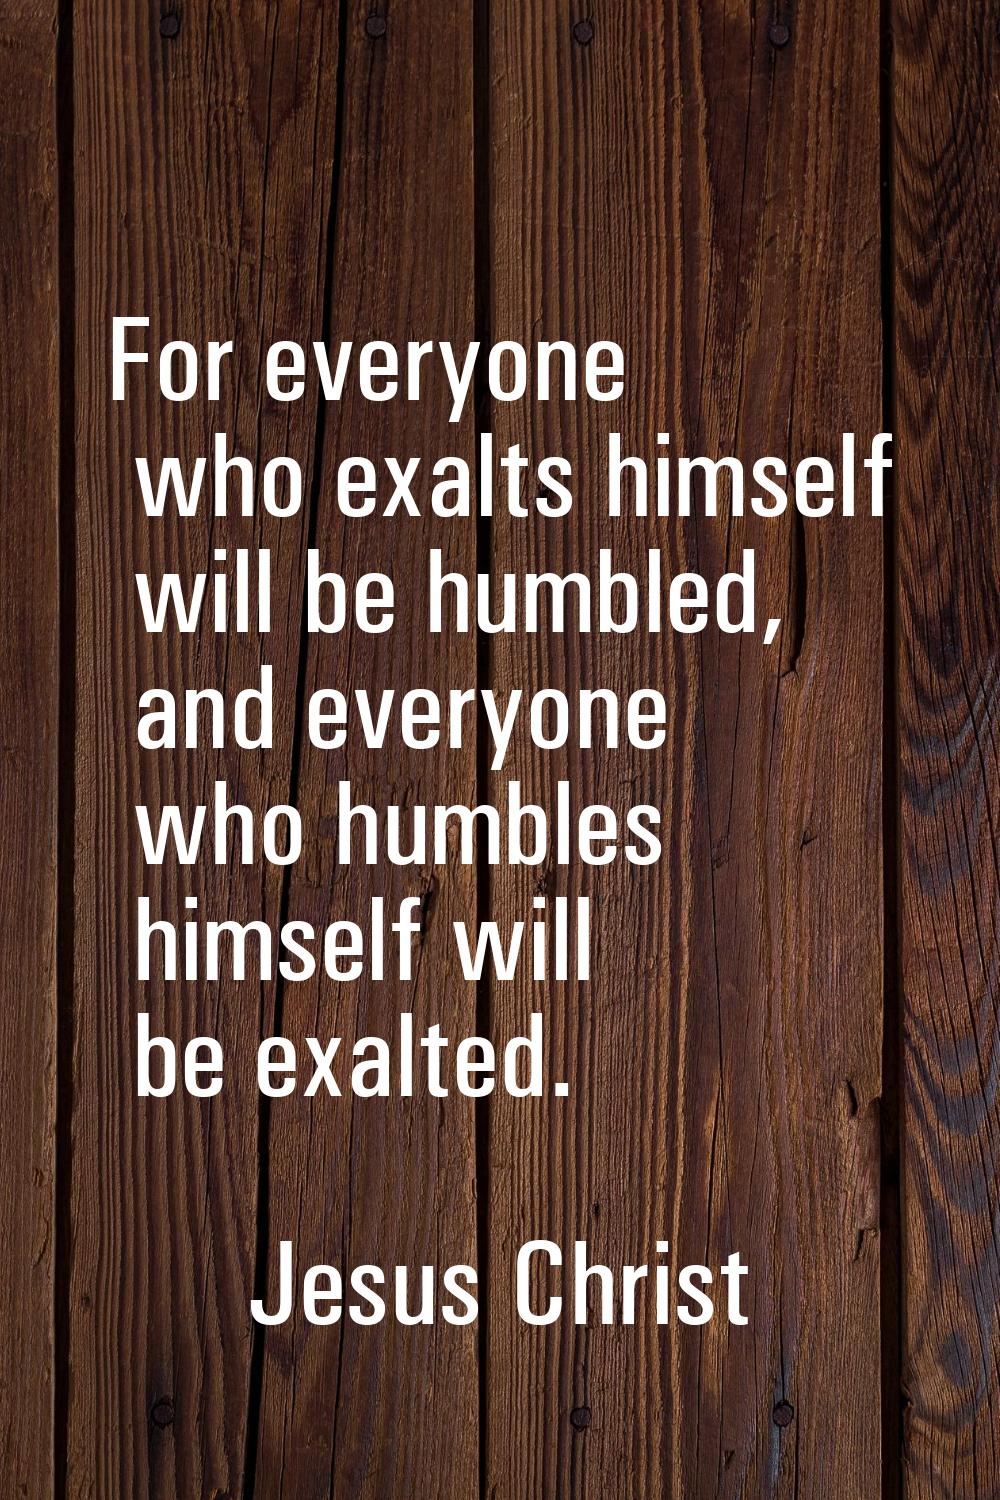 For everyone who exalts himself will be humbled, and everyone who humbles himself will be exalted.